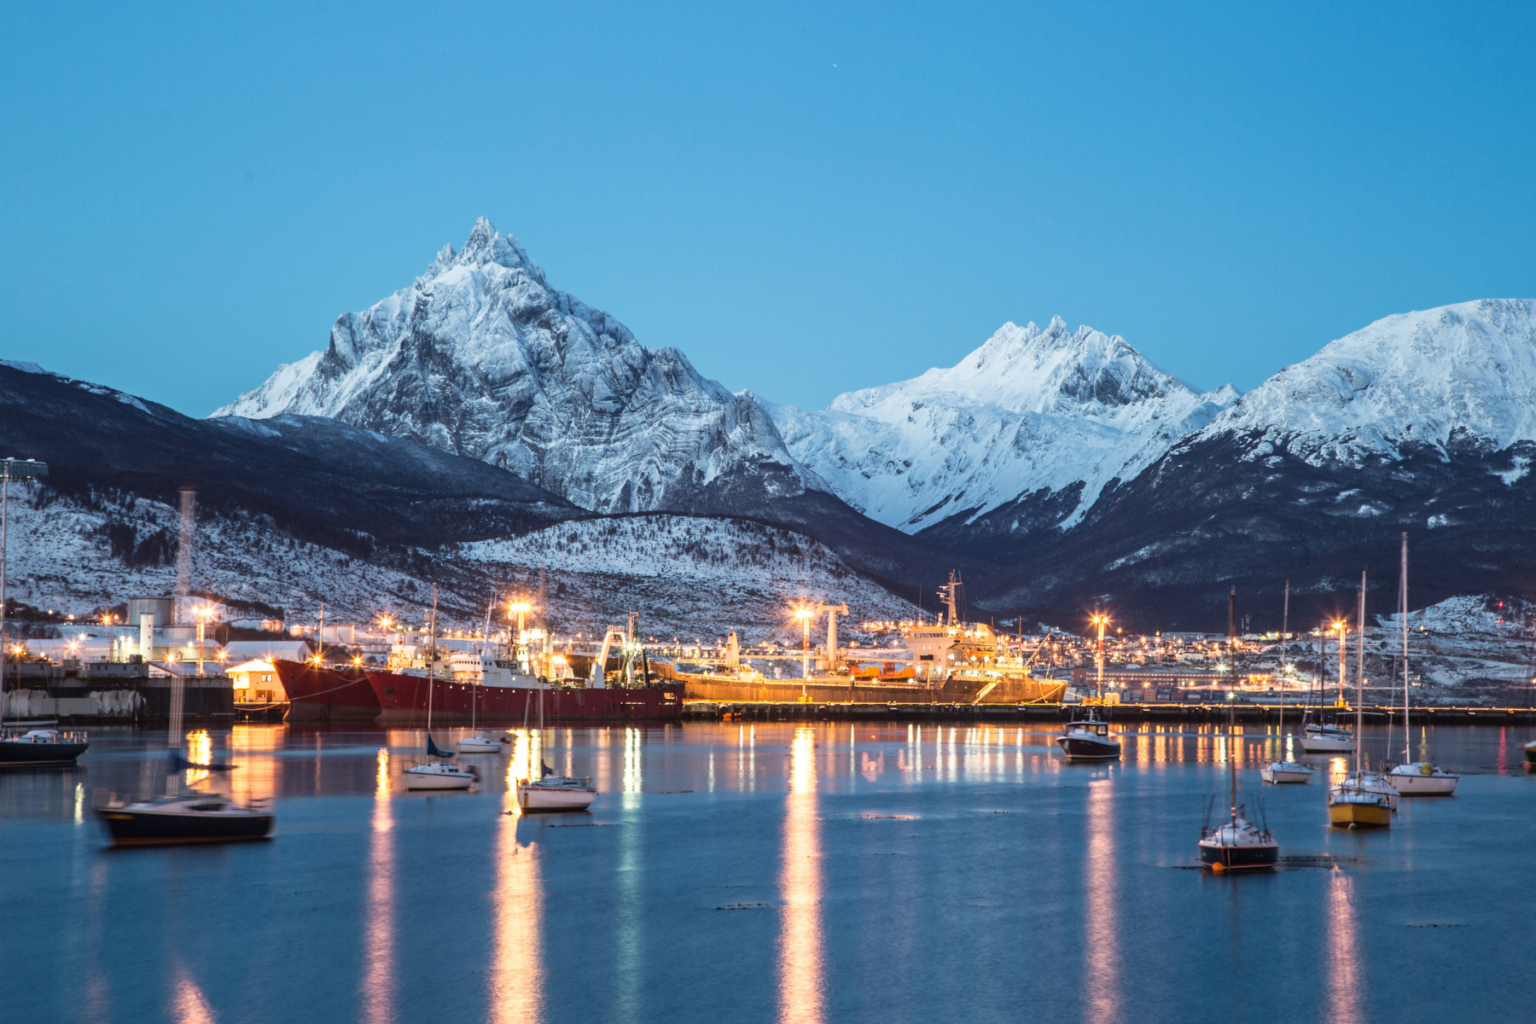 Port at dusk with snowcapped mountains